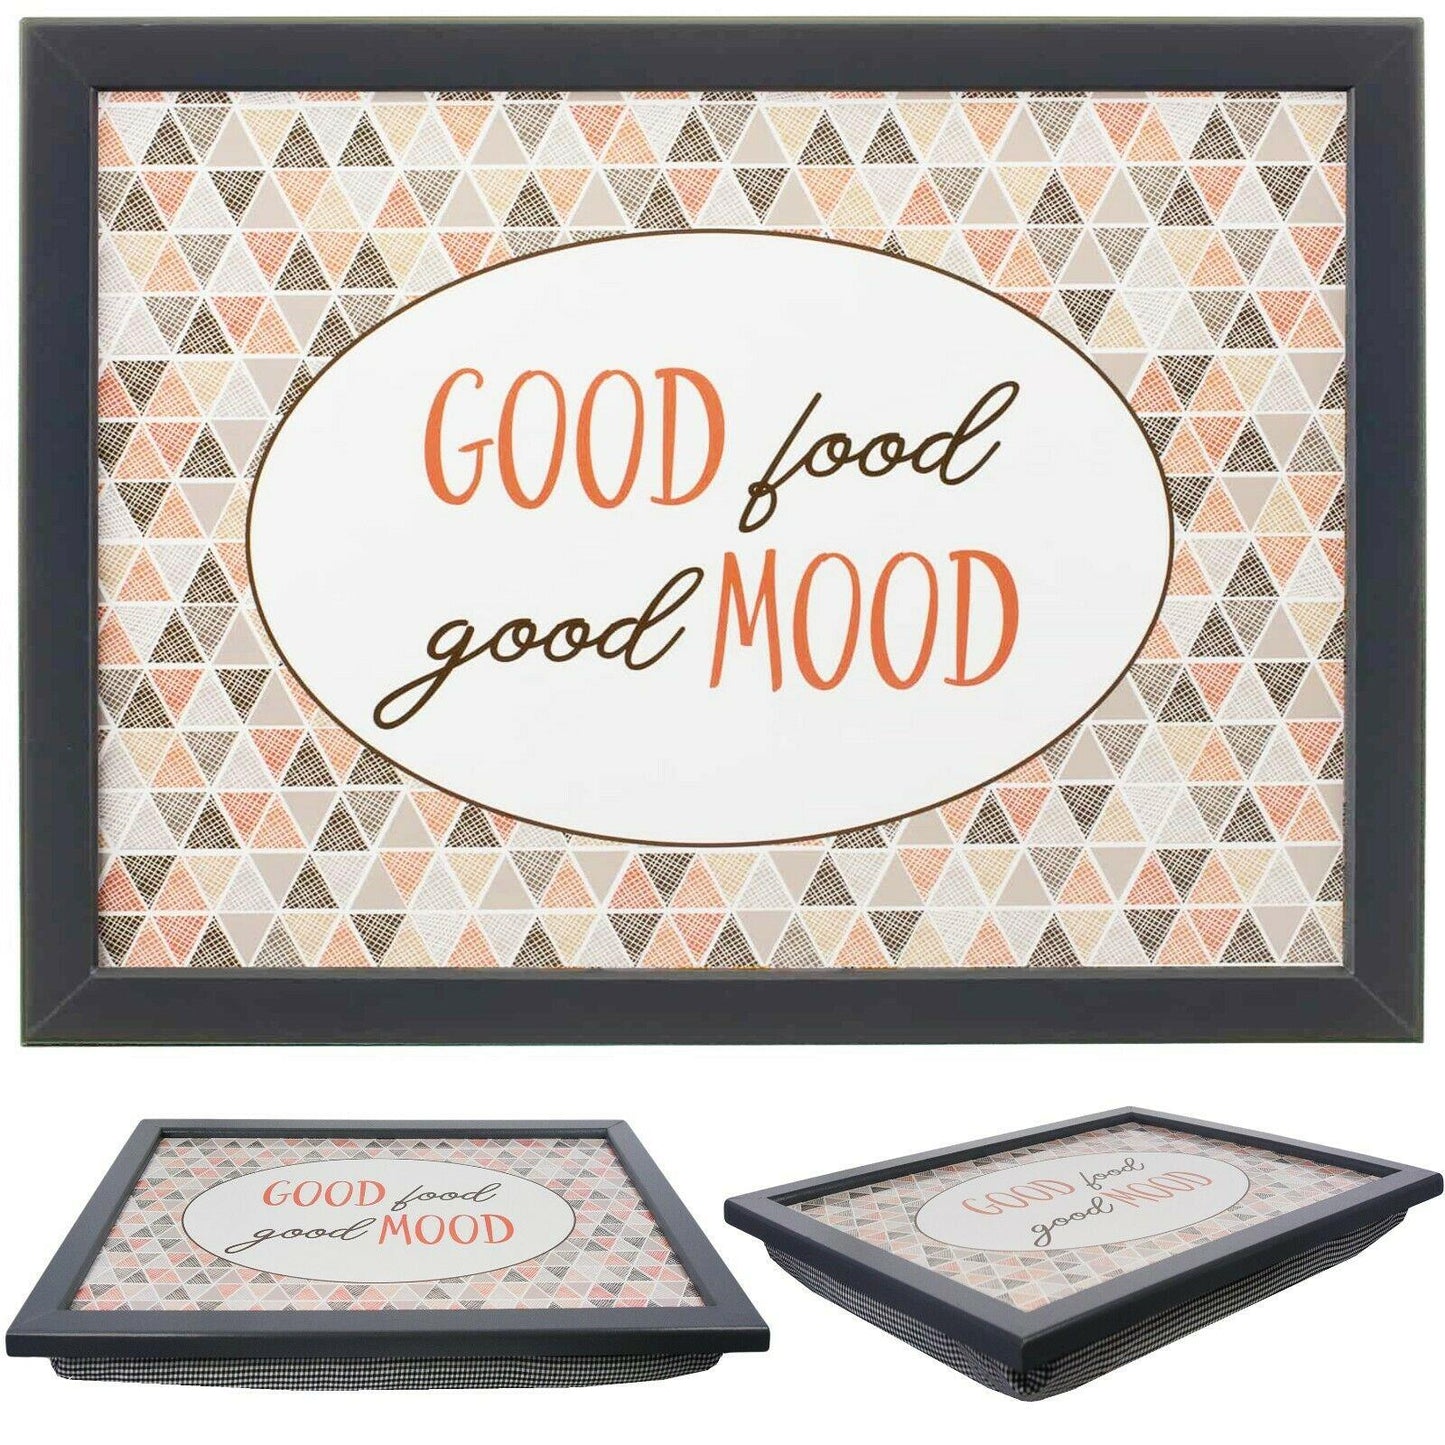 Good Food Good Mood Lap Tray With Bean Bag Cushion by Geezy - UKBuyZone